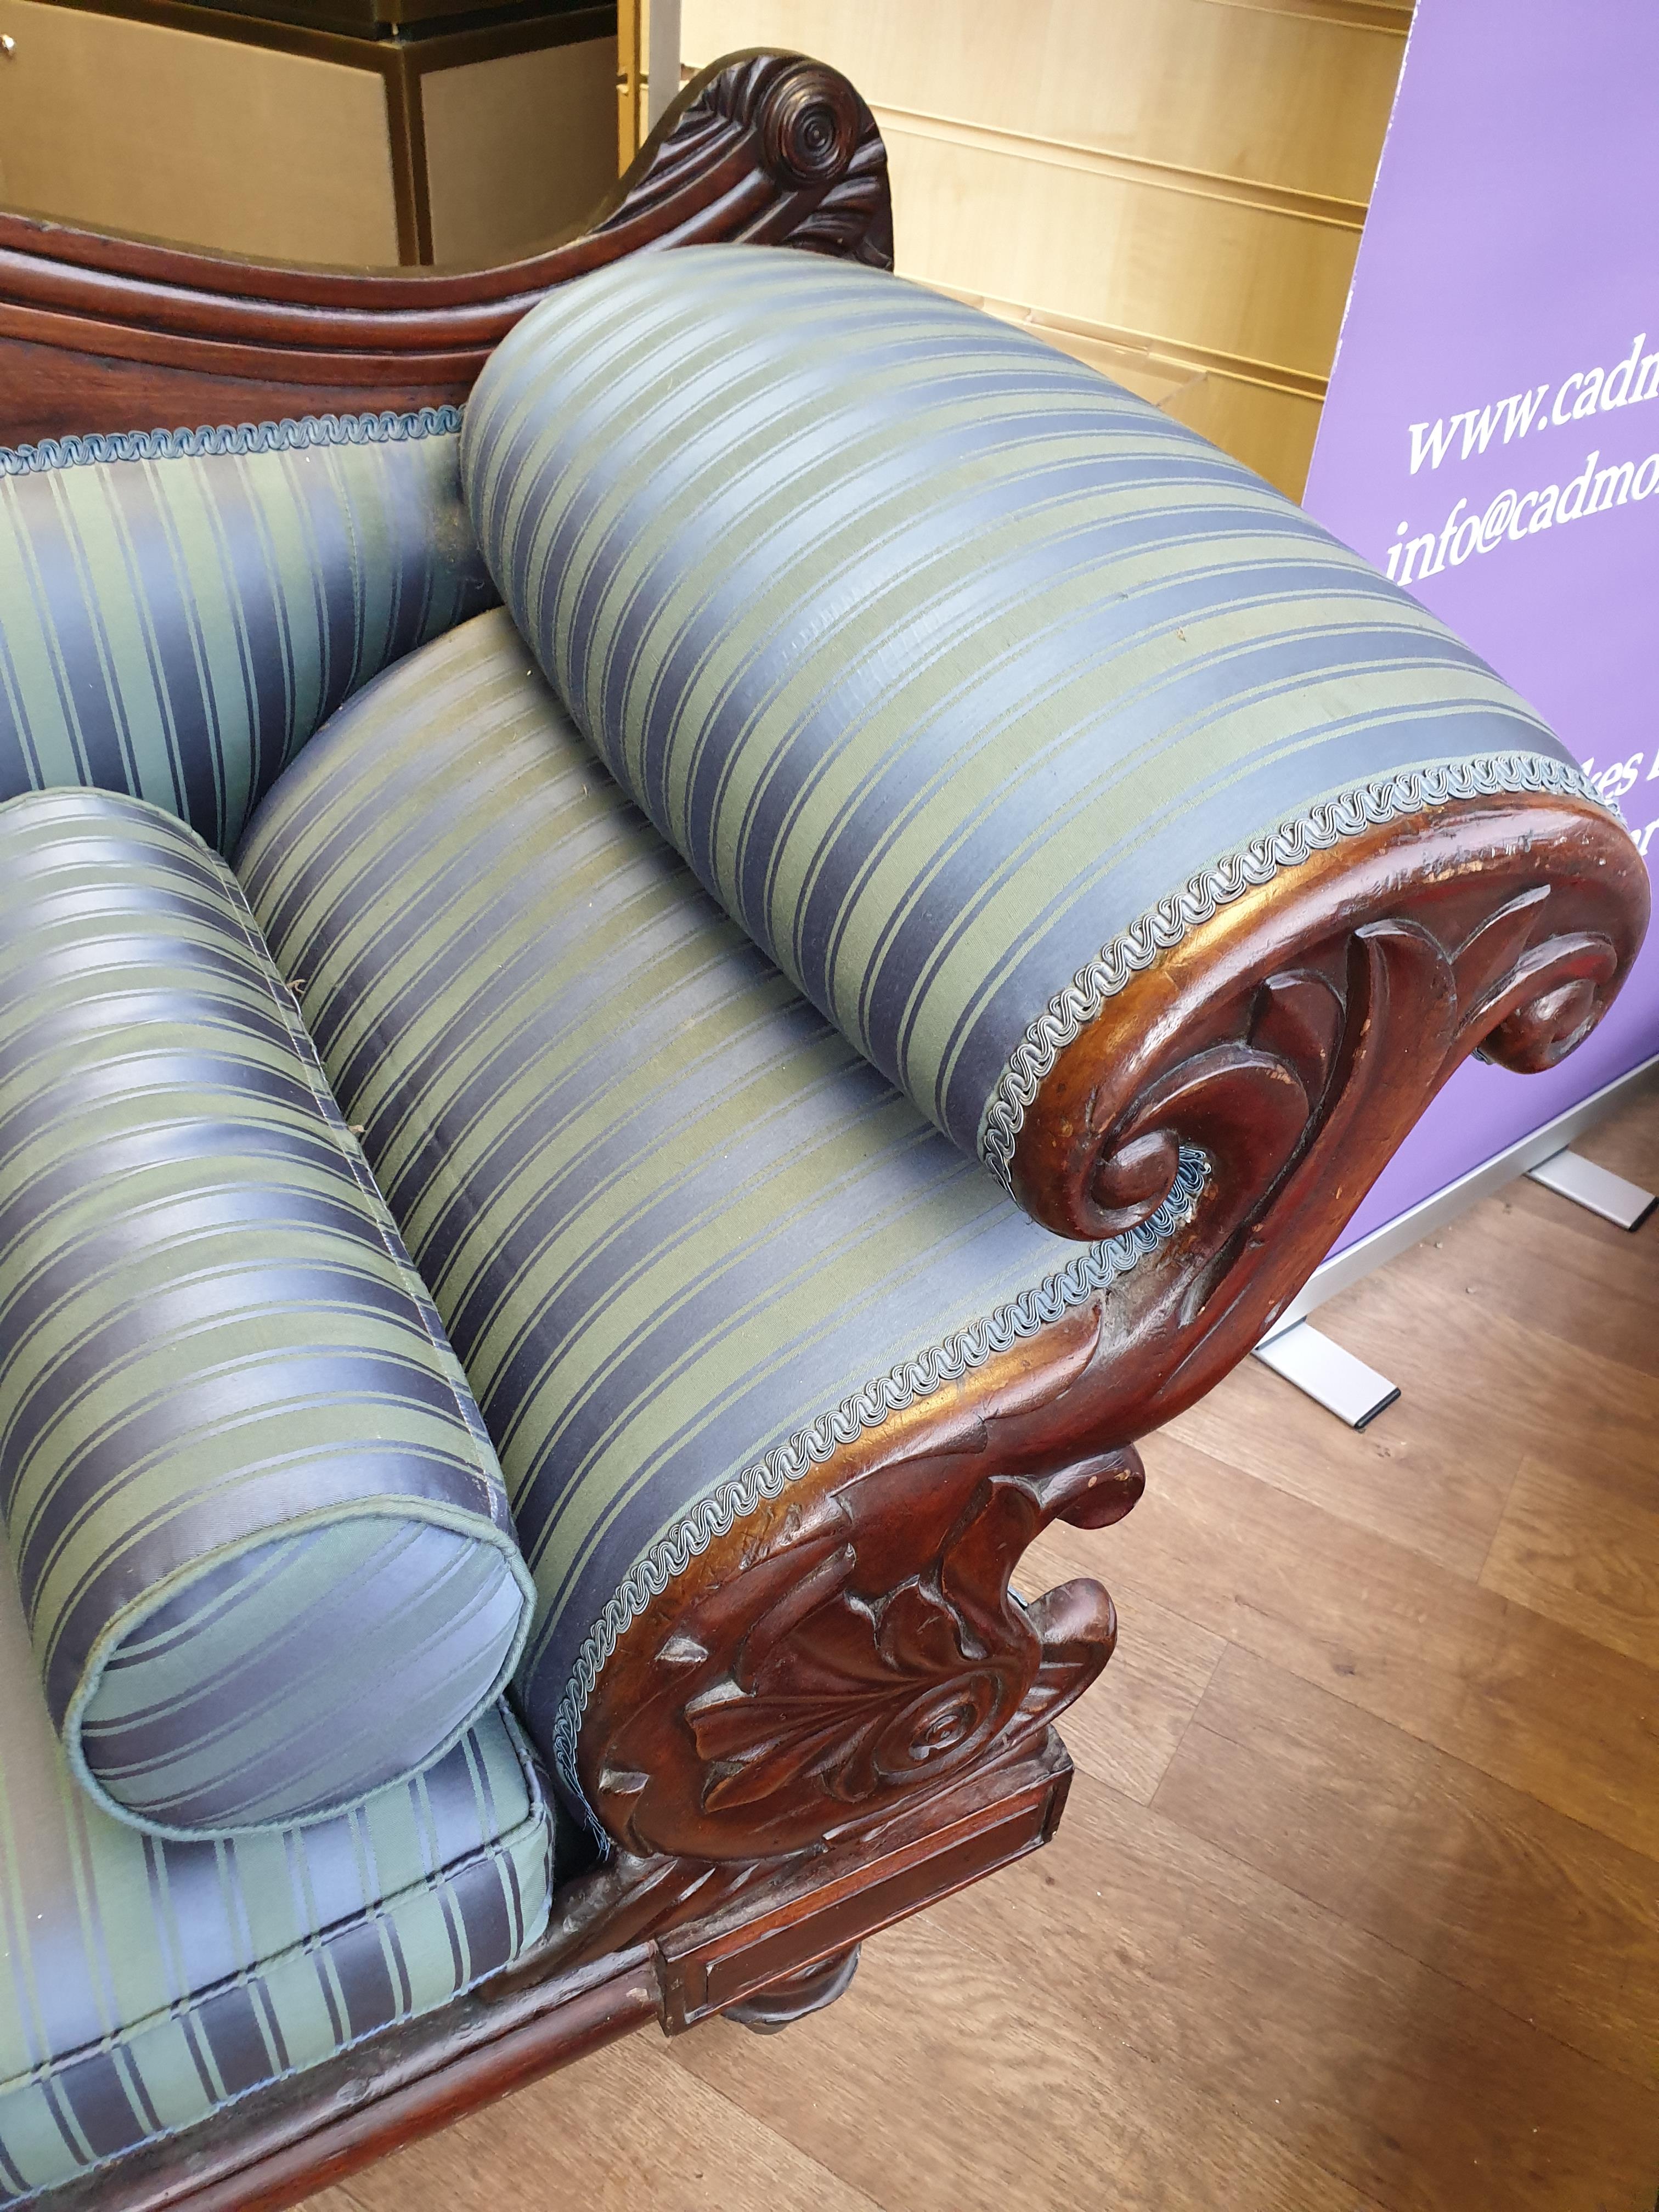 Victorian Handmade Sofa on Casters, been sympathetically restored with a blue satin stripe finish, - Image 14 of 16